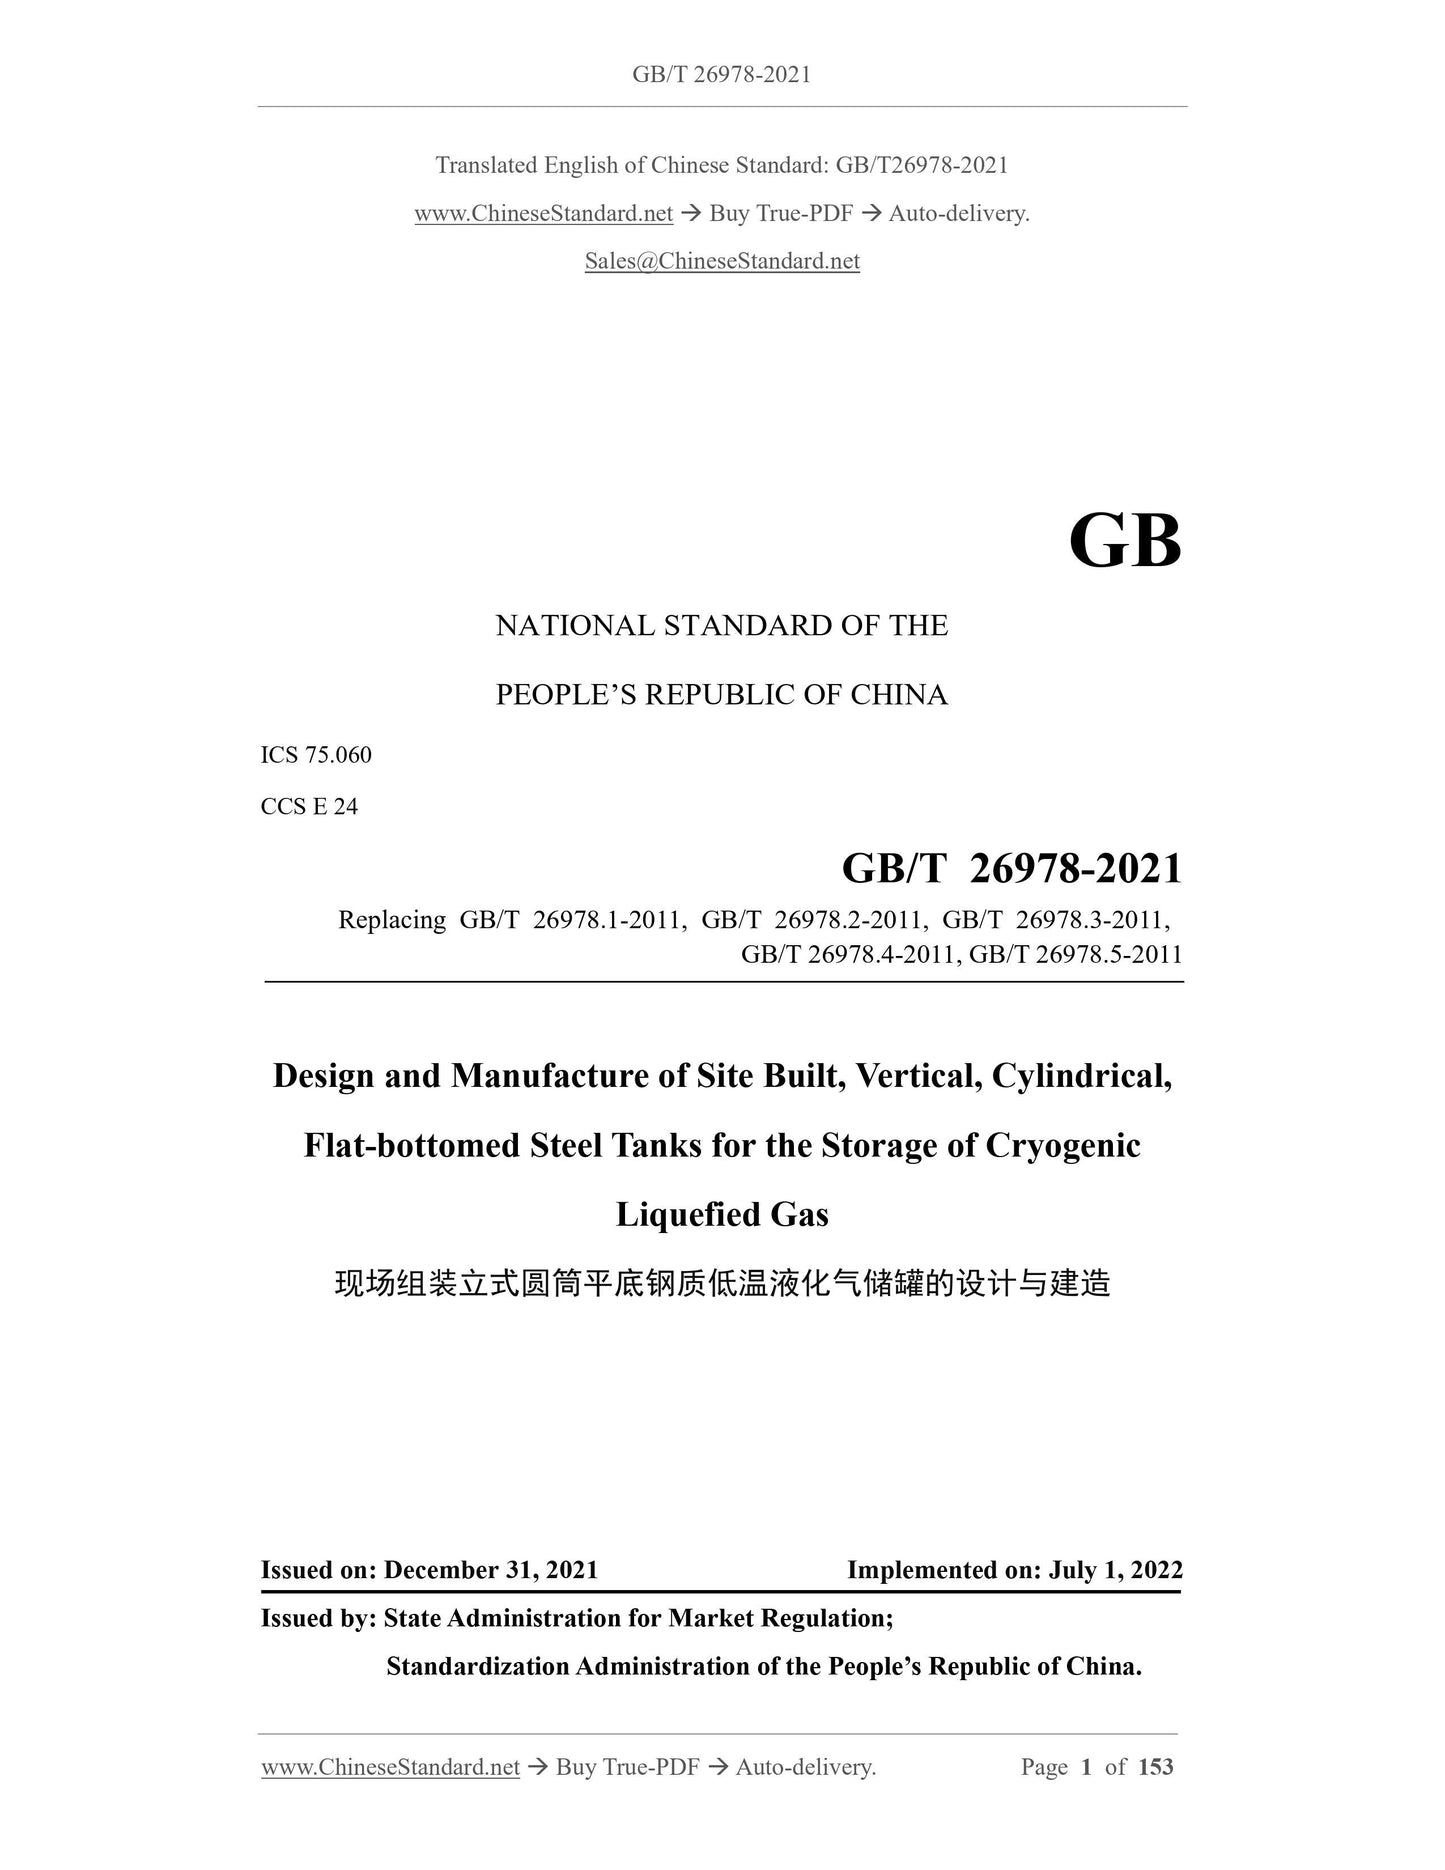 GB/T 26978-2021 Page 1